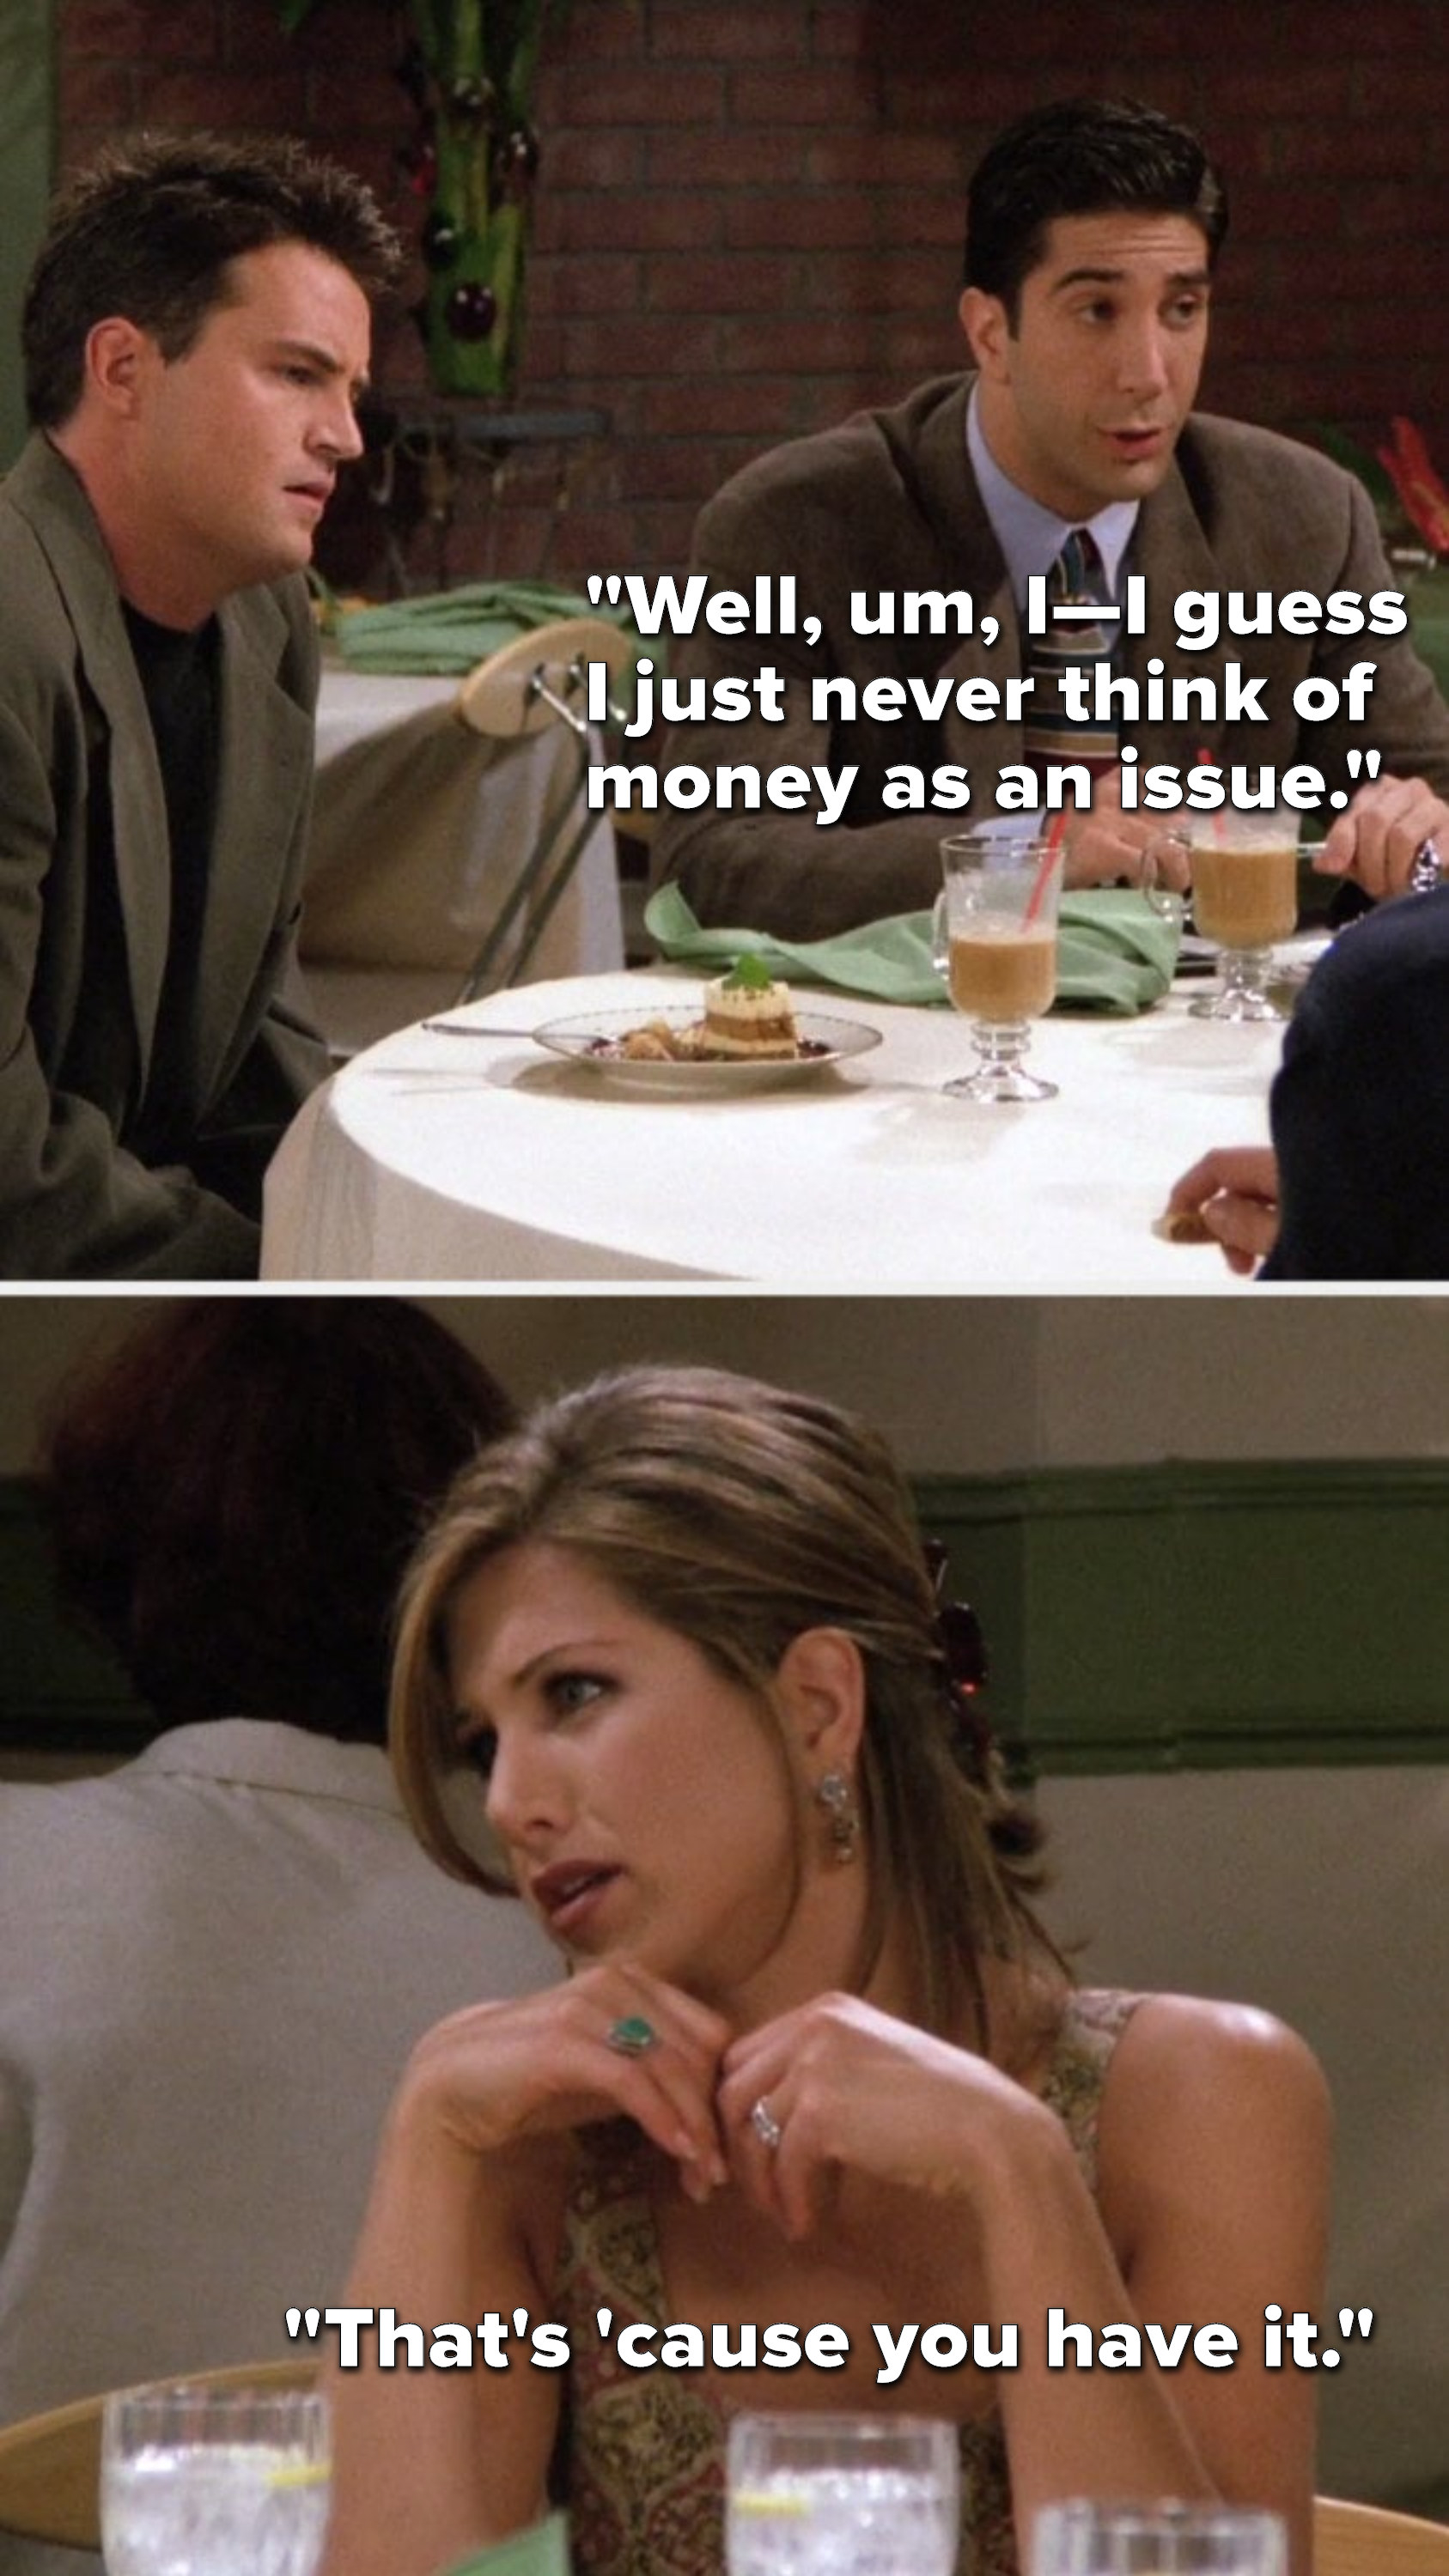 Ross says, Well, um, I, I guess I just never think of money as an issue, and Rachel says, Thats cause you have it